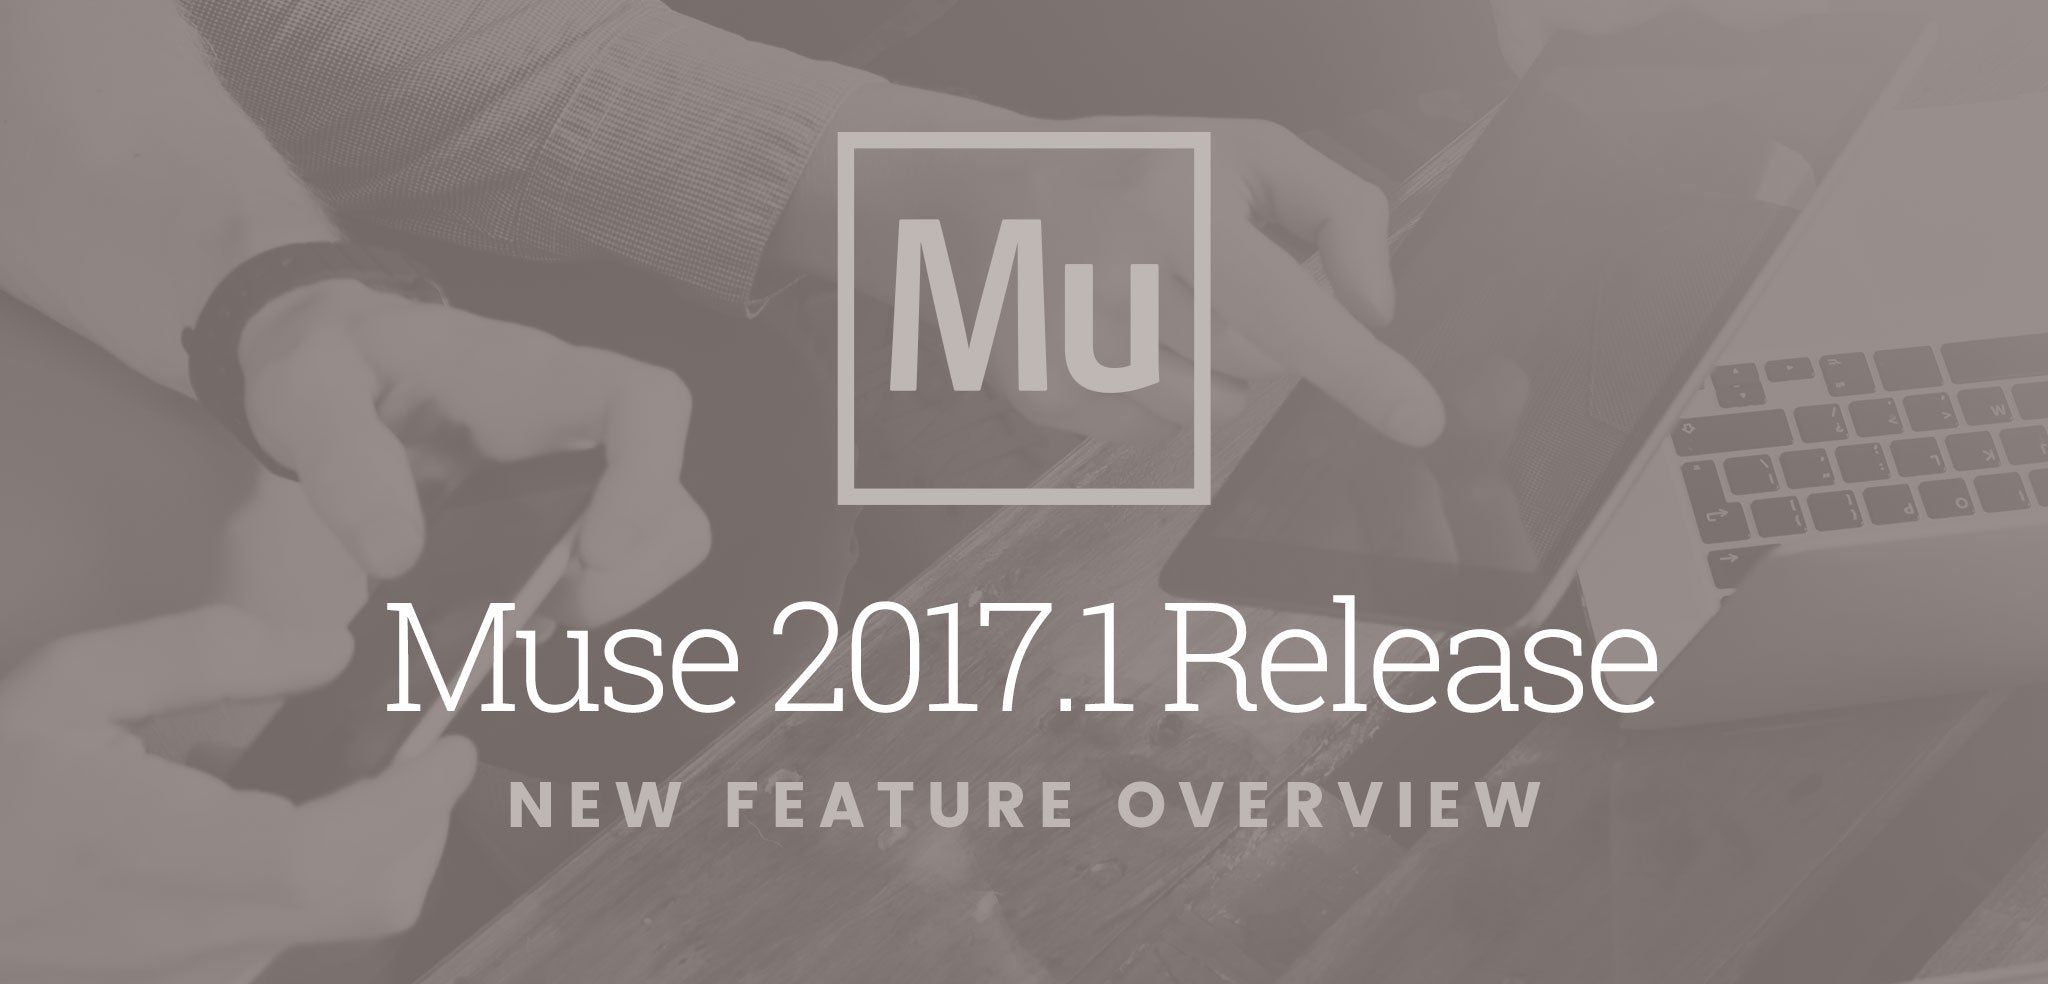 Muse 2017.1 Release – New Feature Overview